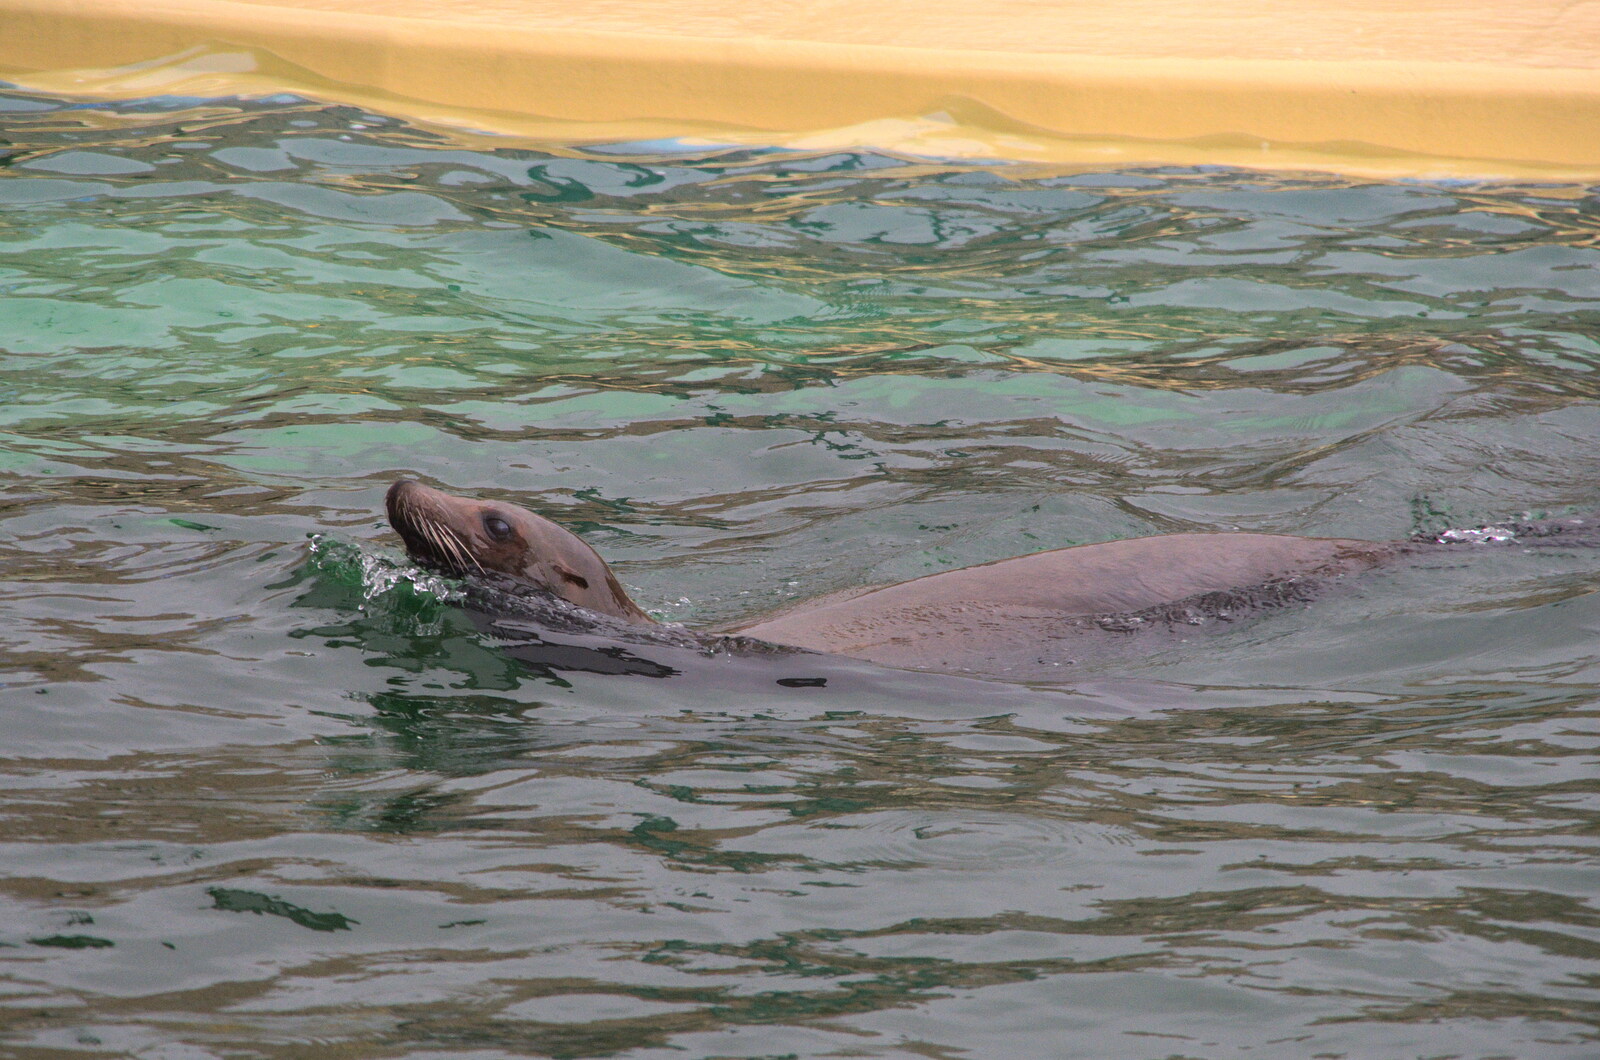 A Few Hours at the Zoo, Banham, Norfolk - 8th January 2023: A sea lion has a swim